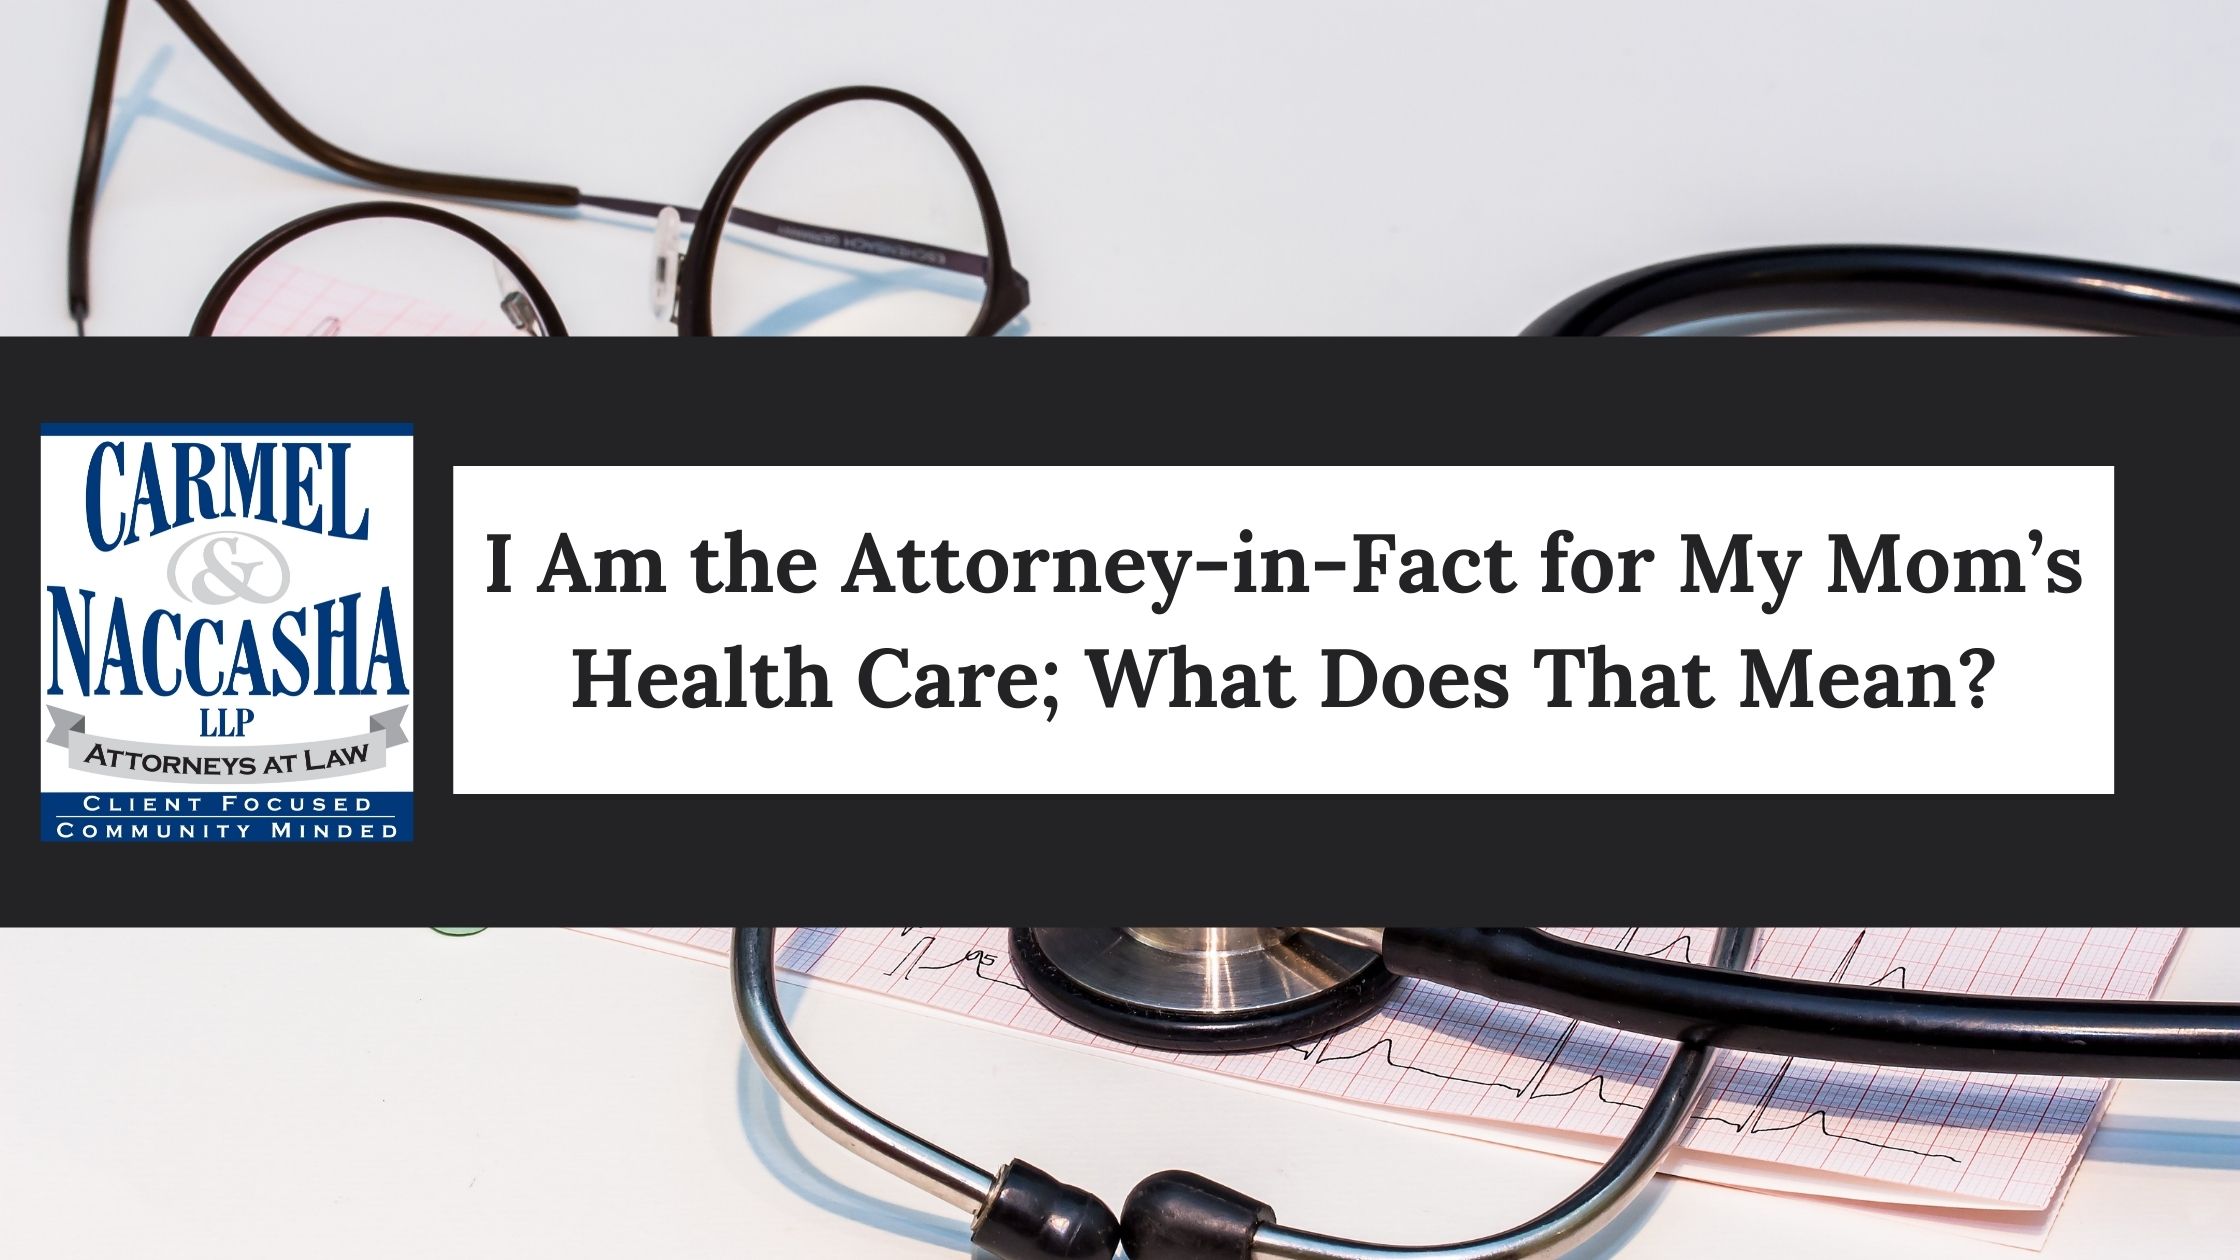 I Am the Attorney-in-Fact for My Mom’s Health Care; What Does That Mean?